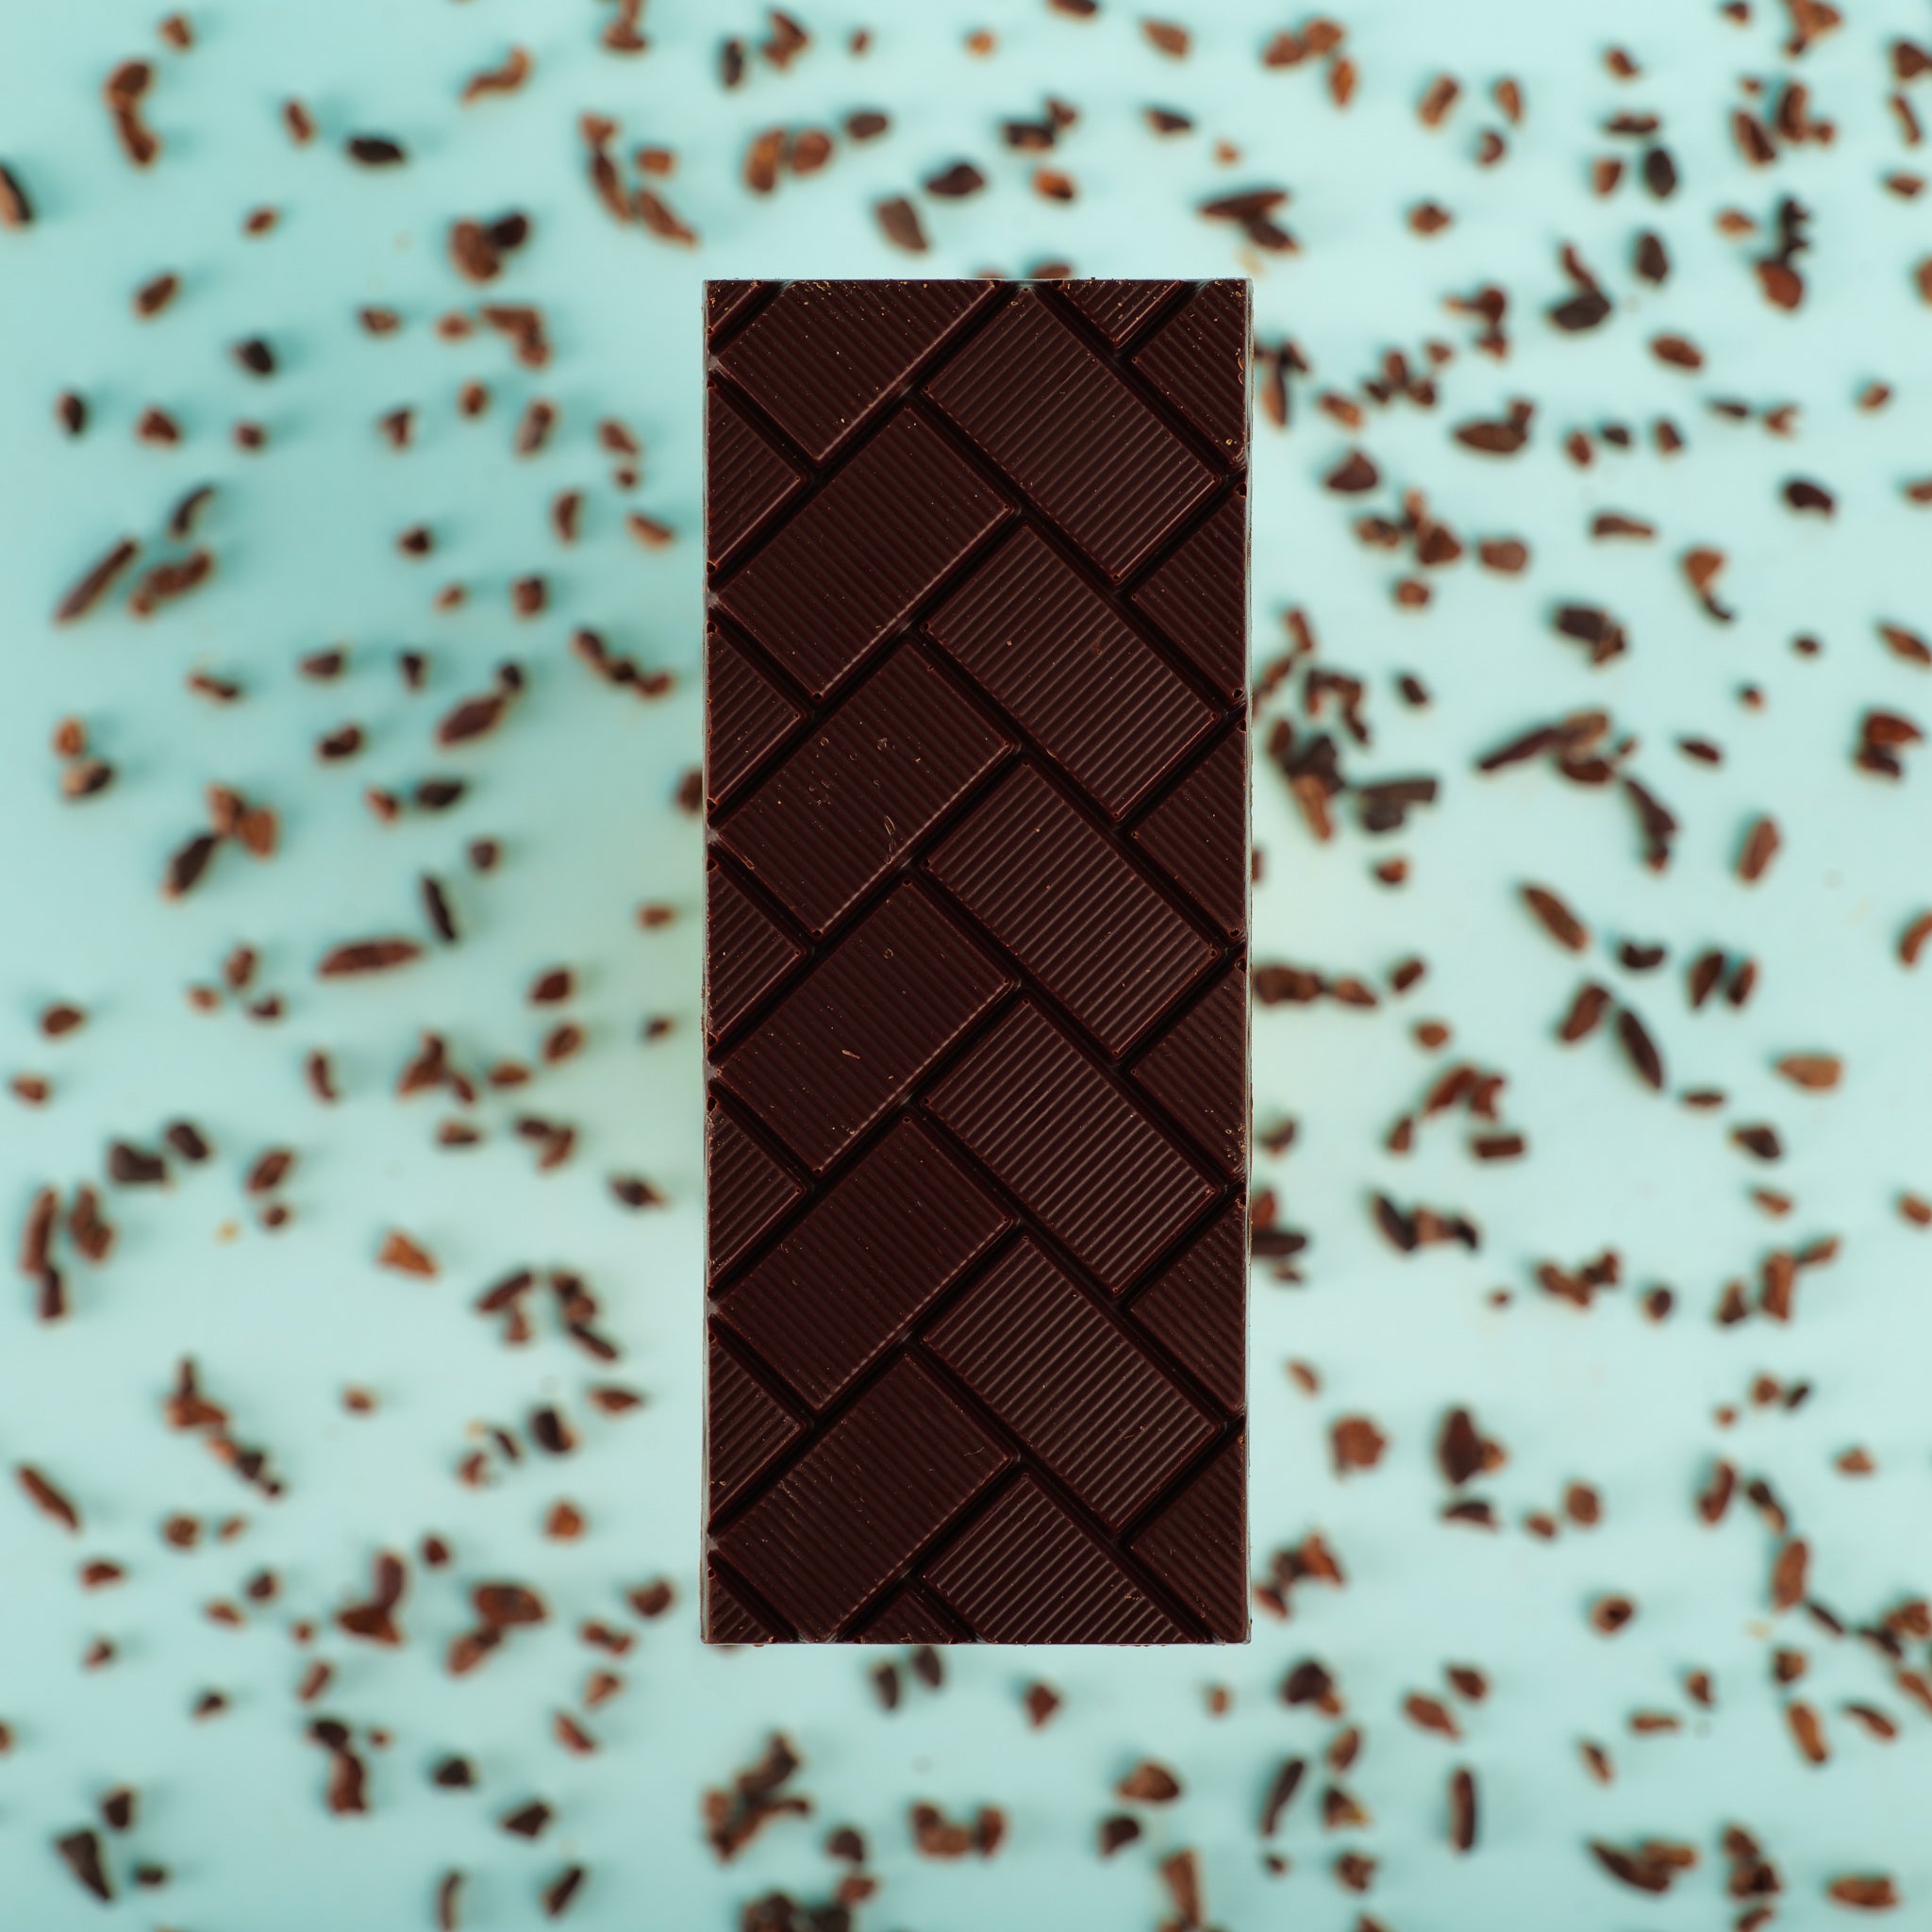 a sugar-free bar on a blue background surrounded by cocoa nibs